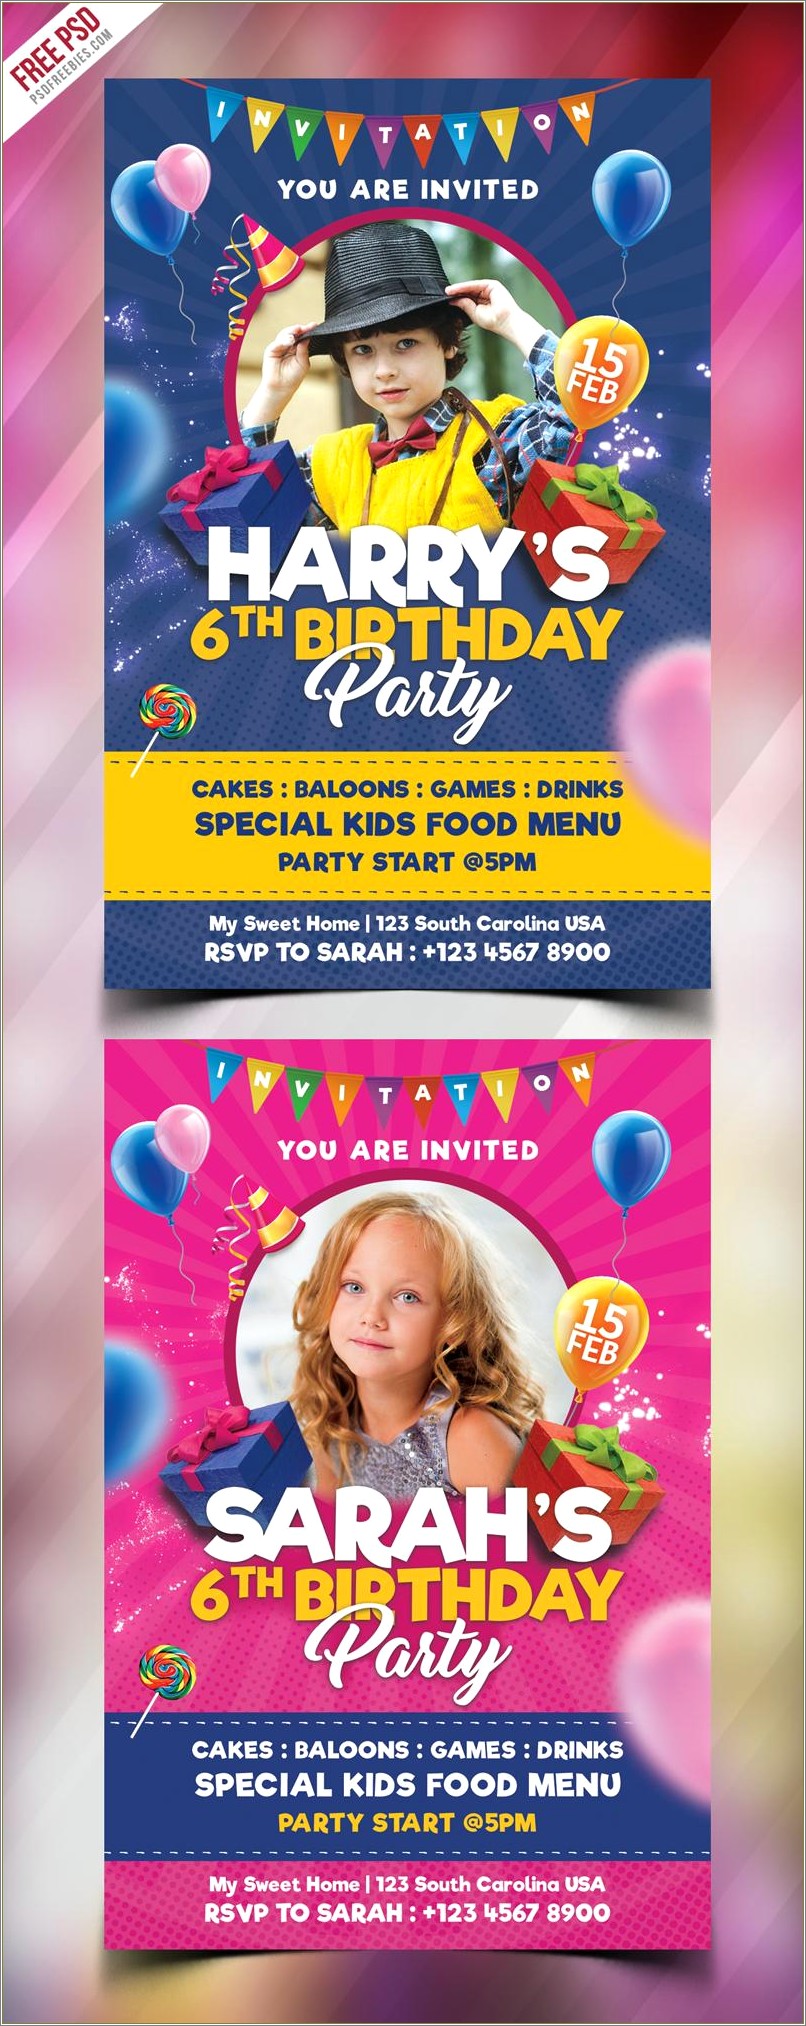 Free Party Invitation Card Template Photoshop